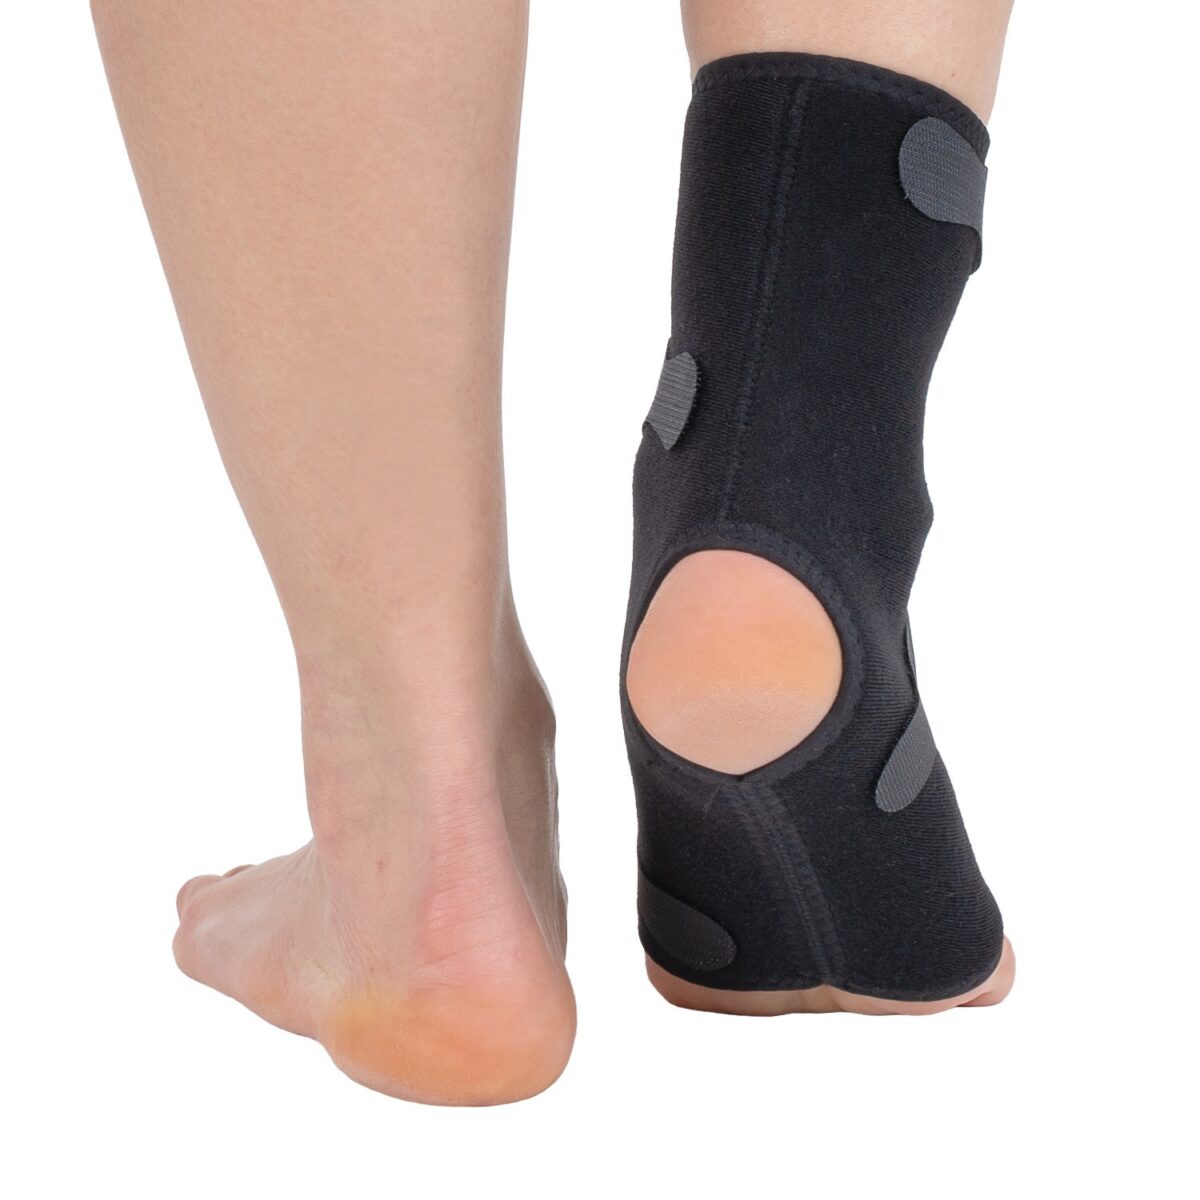 wingmed orthopedic equipments W603 ankle support with strap 82 1